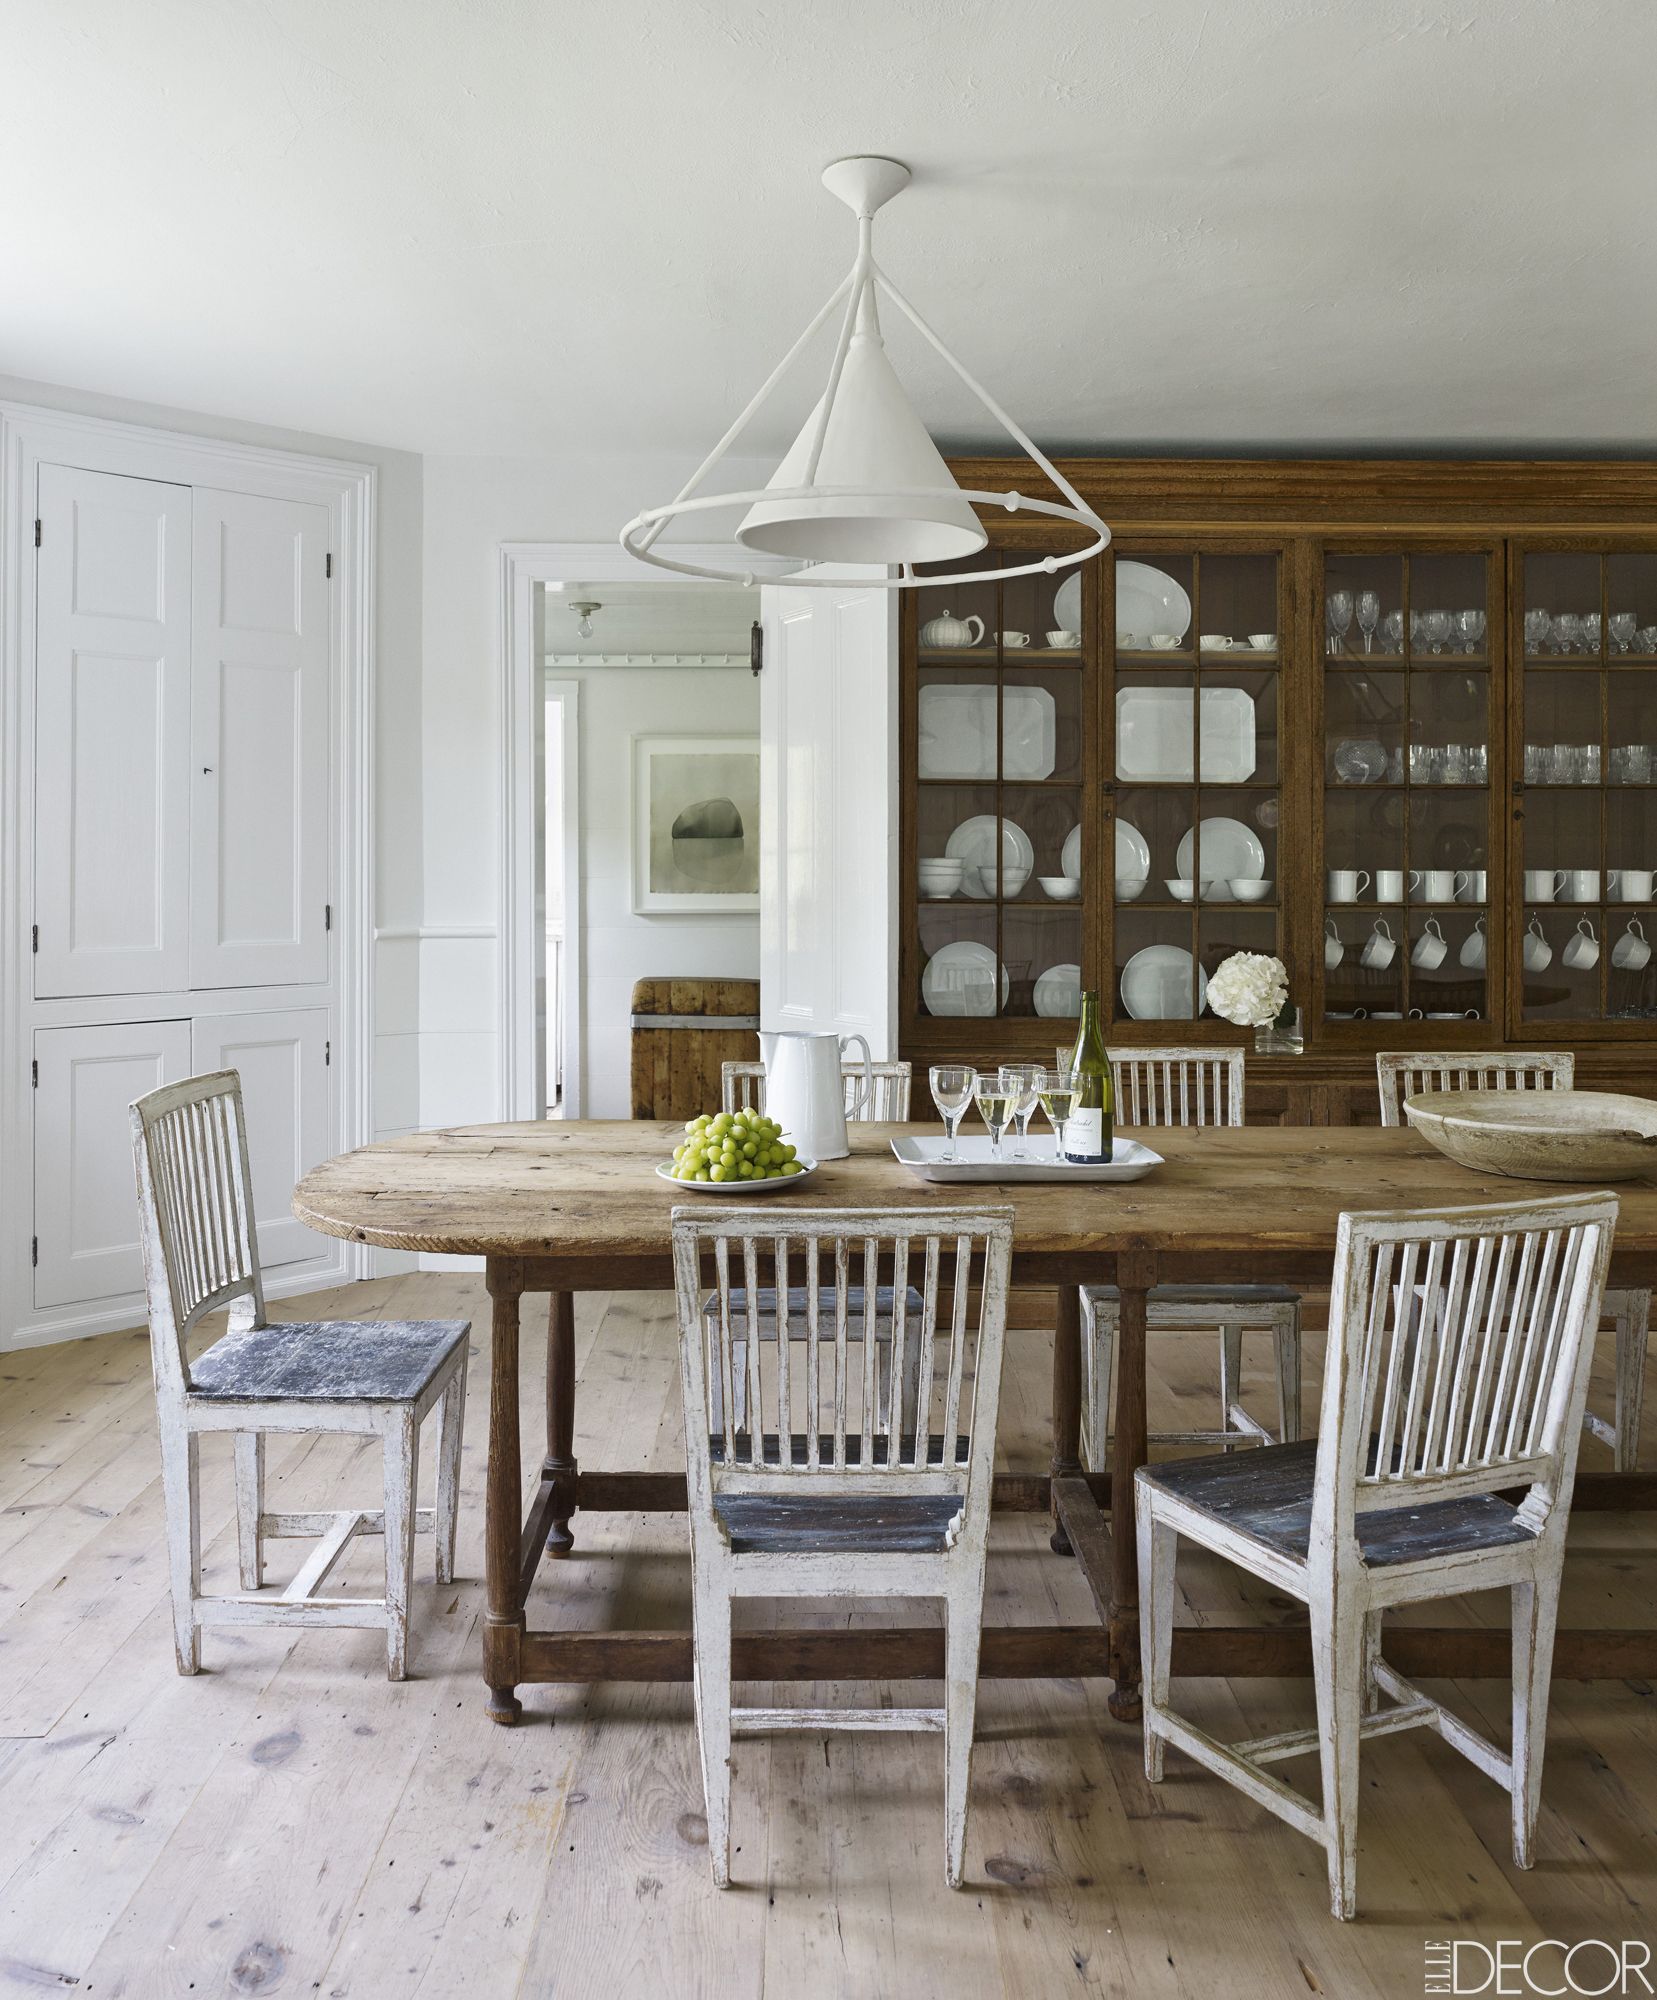 25 Rustic Dining Room Ideas Farmhouse, Images Of Country Dining Rooms